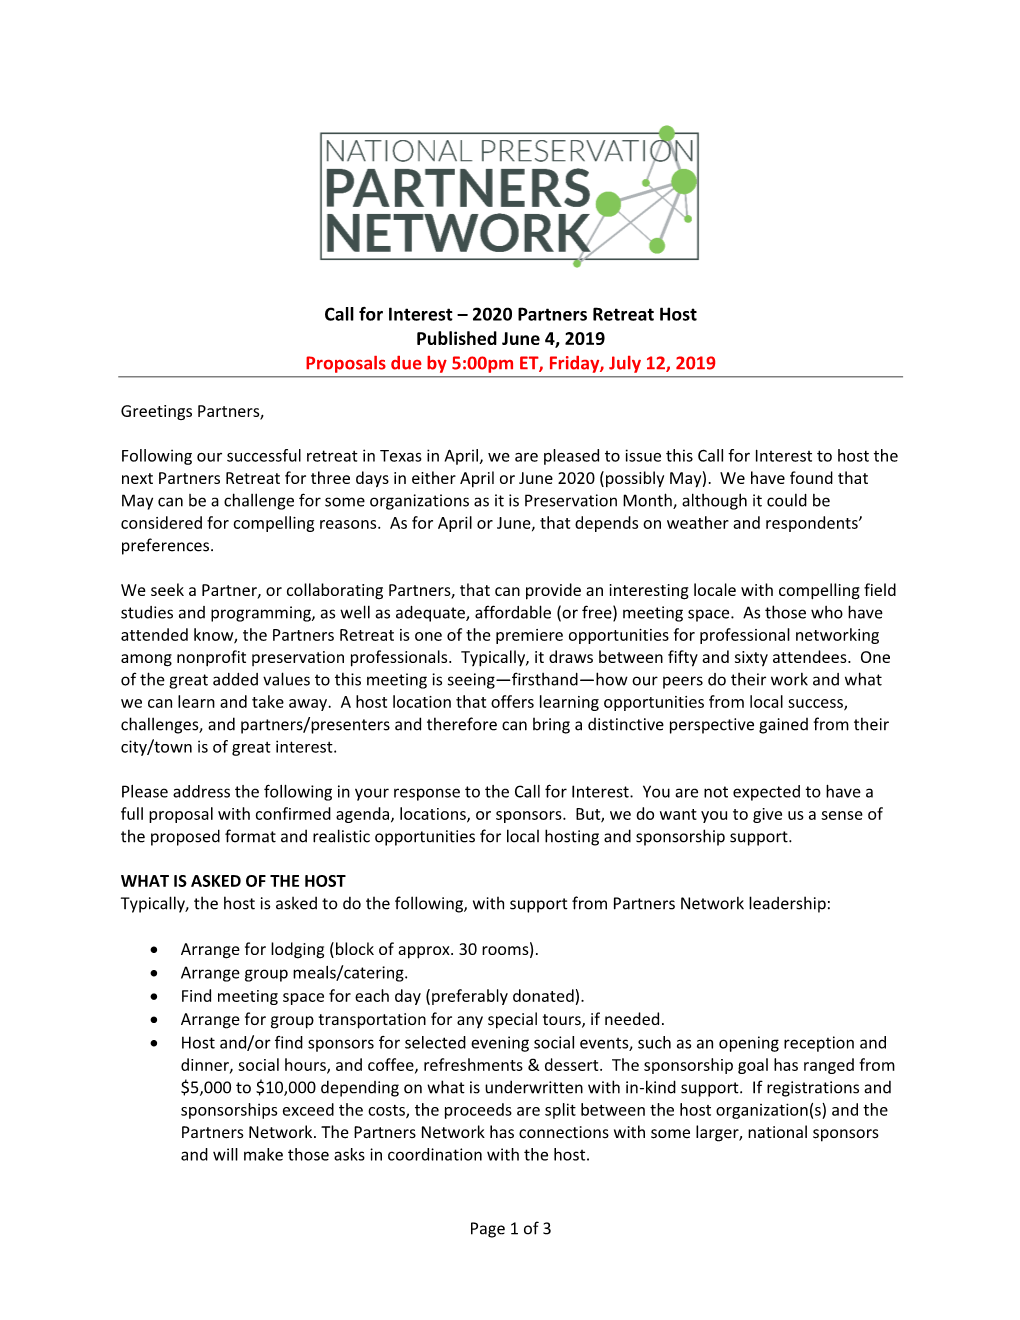 2020 Partners Retreat Host Published June 4, 2019 Proposals Due by 5:00Pm ET, Friday, July 12, 2019